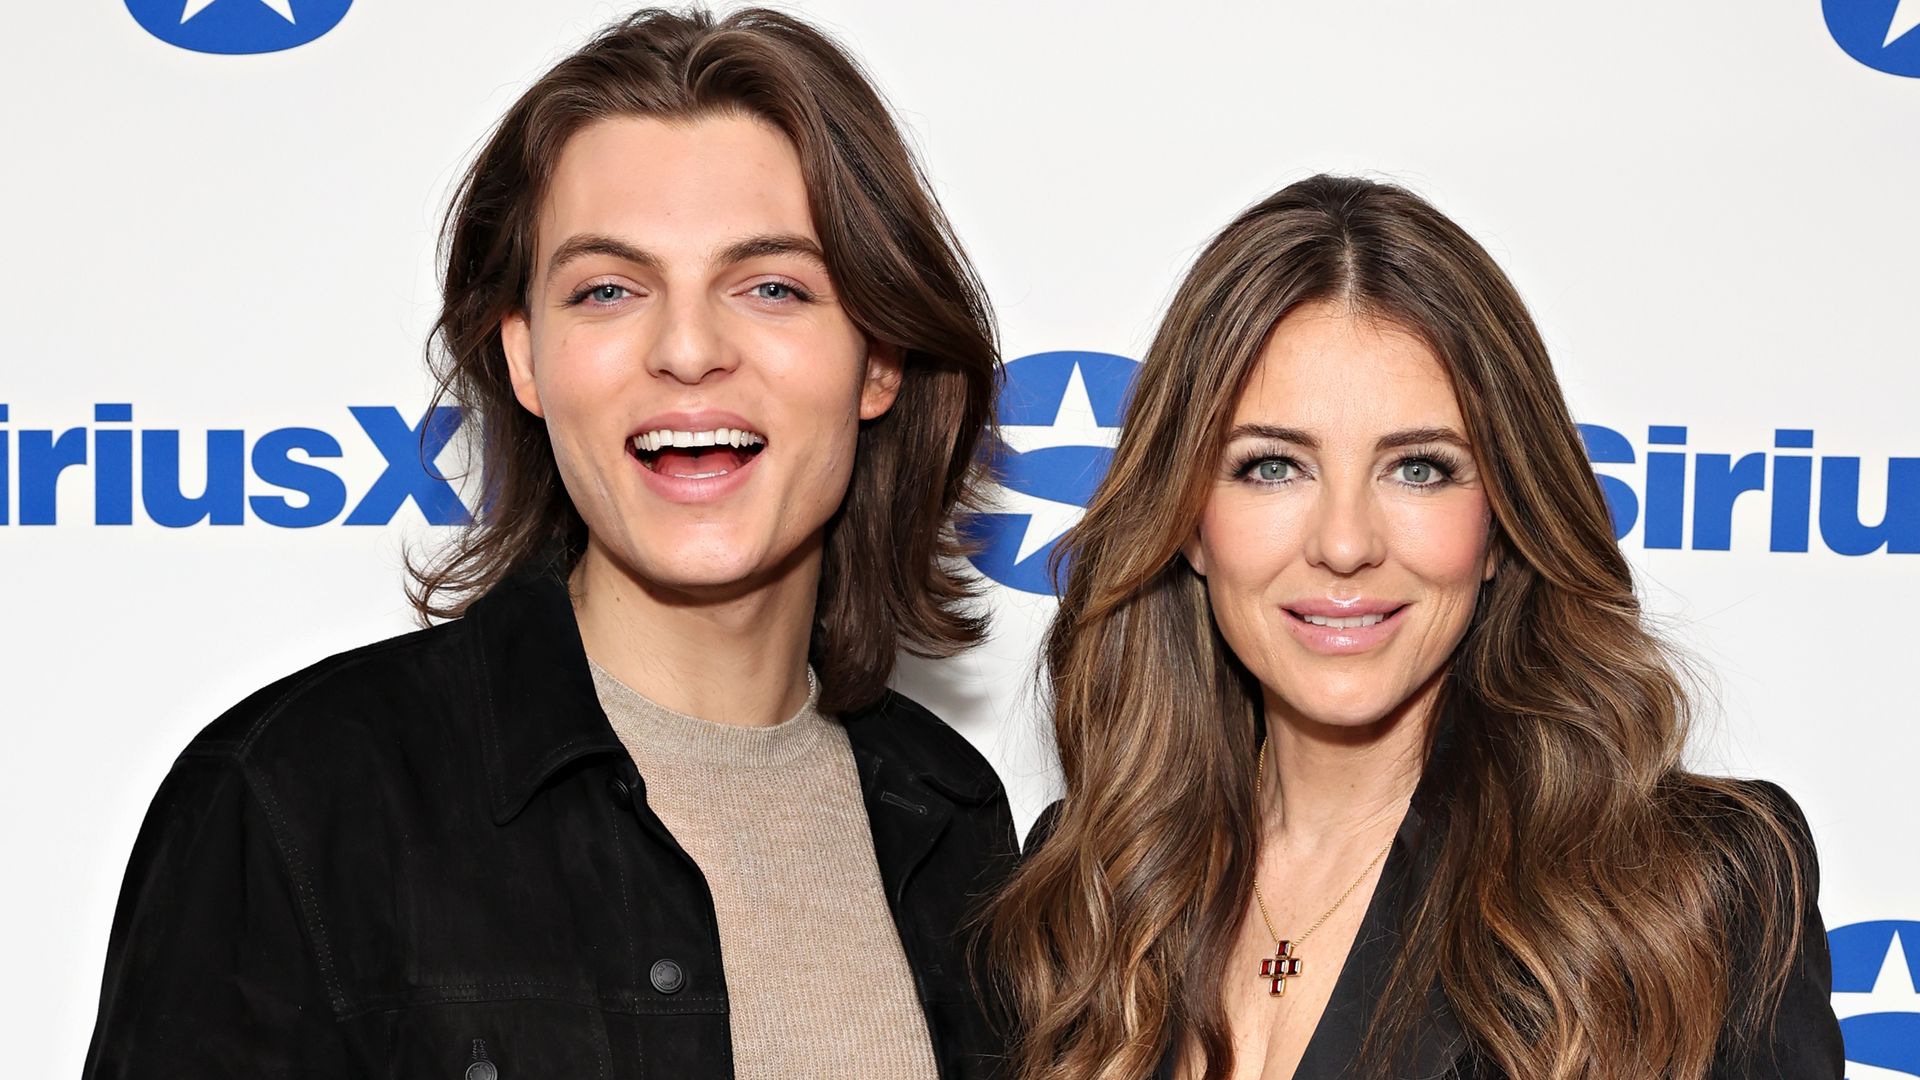 Elizabeth Hurley and her lookalike son Damian turn heads as they twin in black outfits